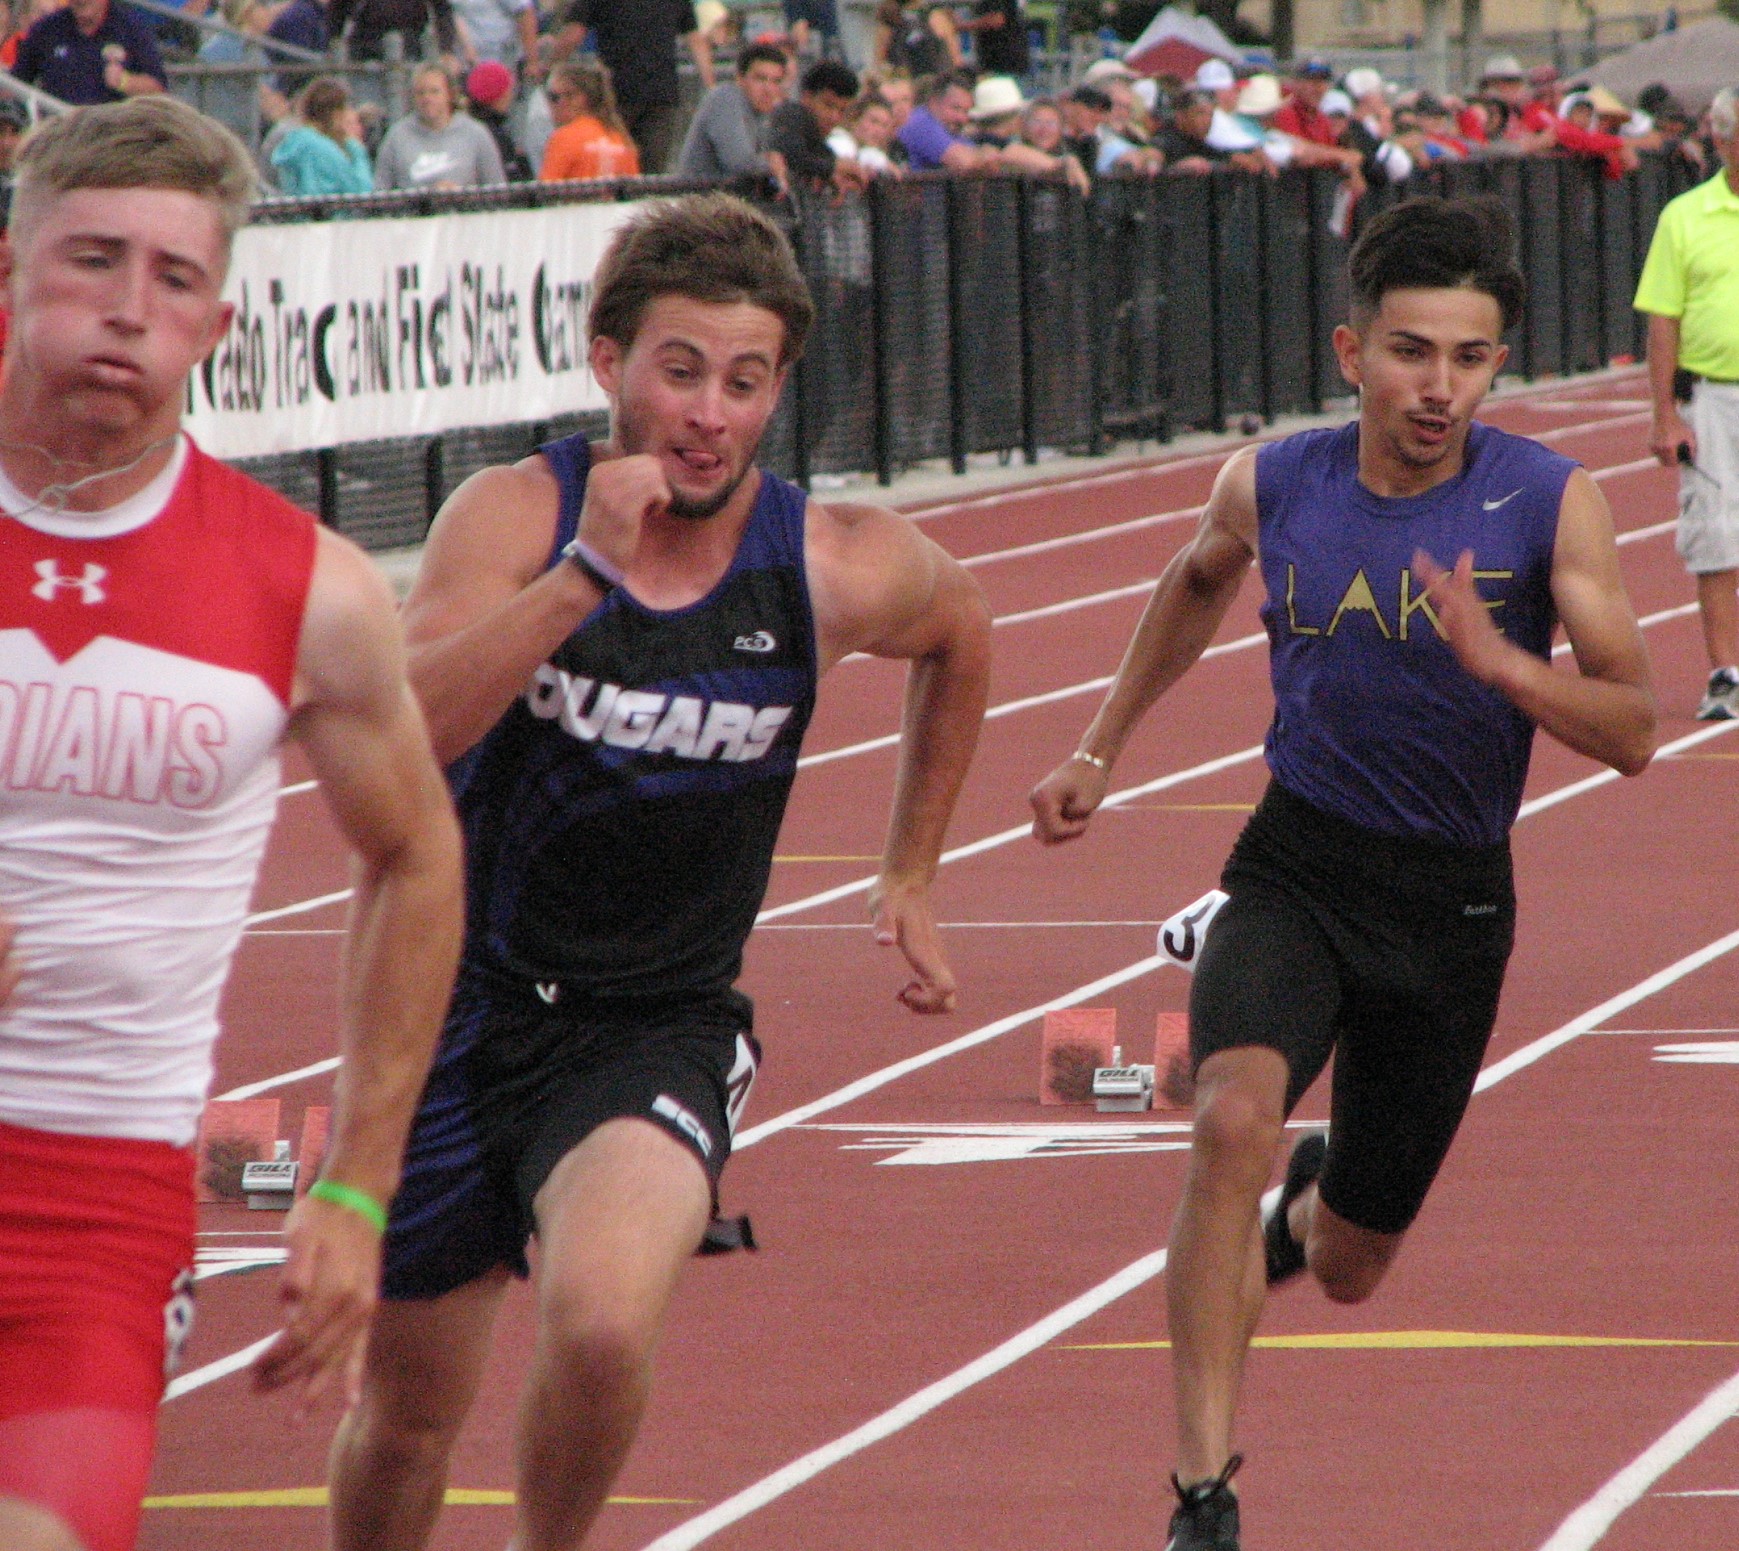 Local placers from day two at the Colorado State Track meet